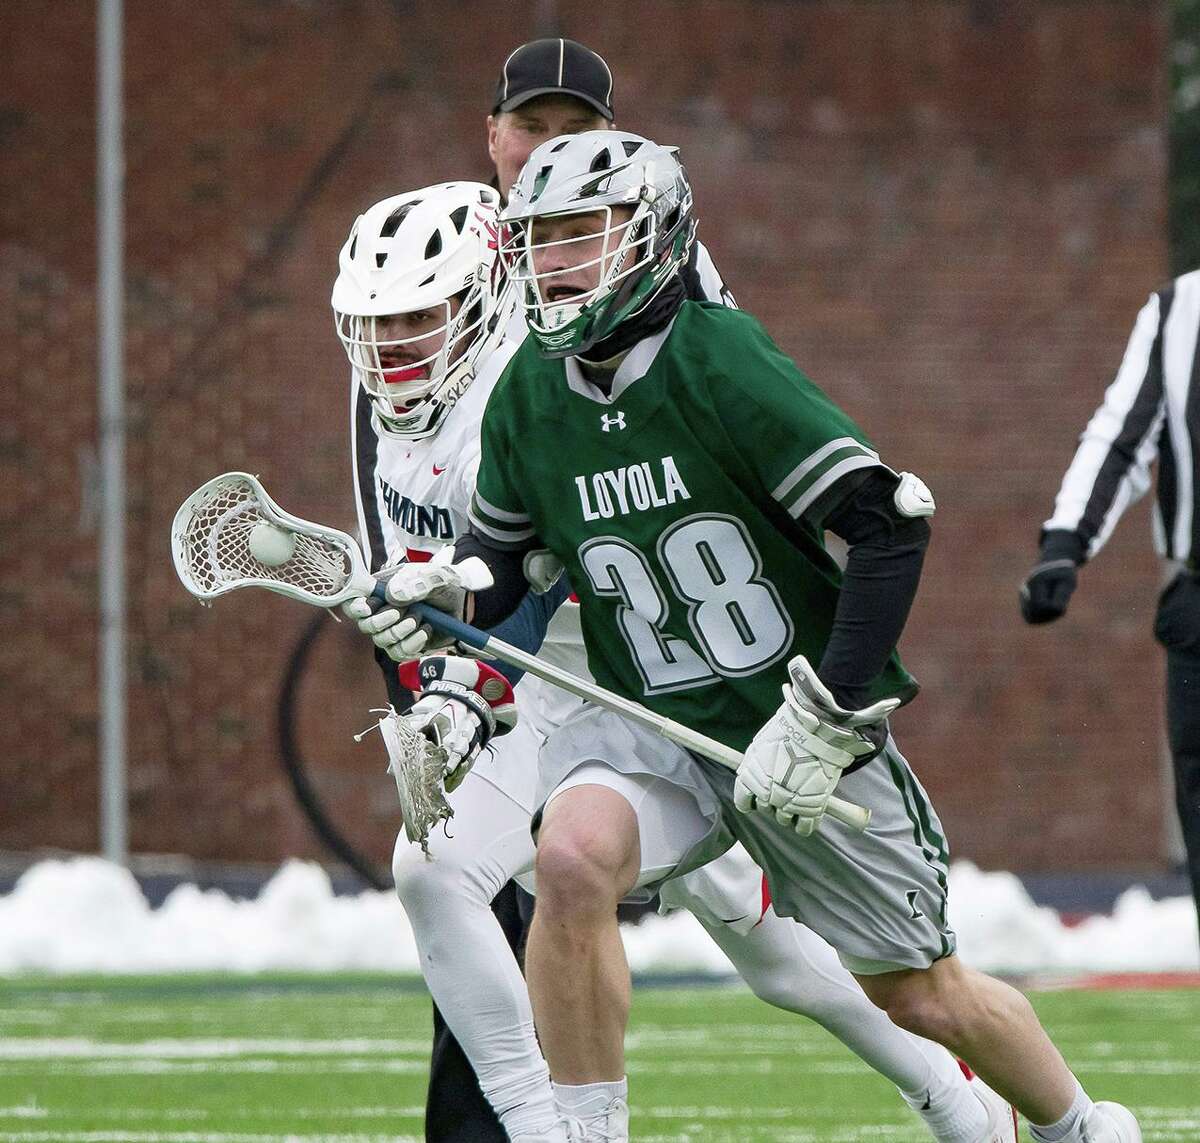 Bailey Savio of the Loyola Maryland men’s lacrosse team wins a faceoff against the University of Richmond on Feb. 14, 2021, at the Spiders’ Robbins Stadium.